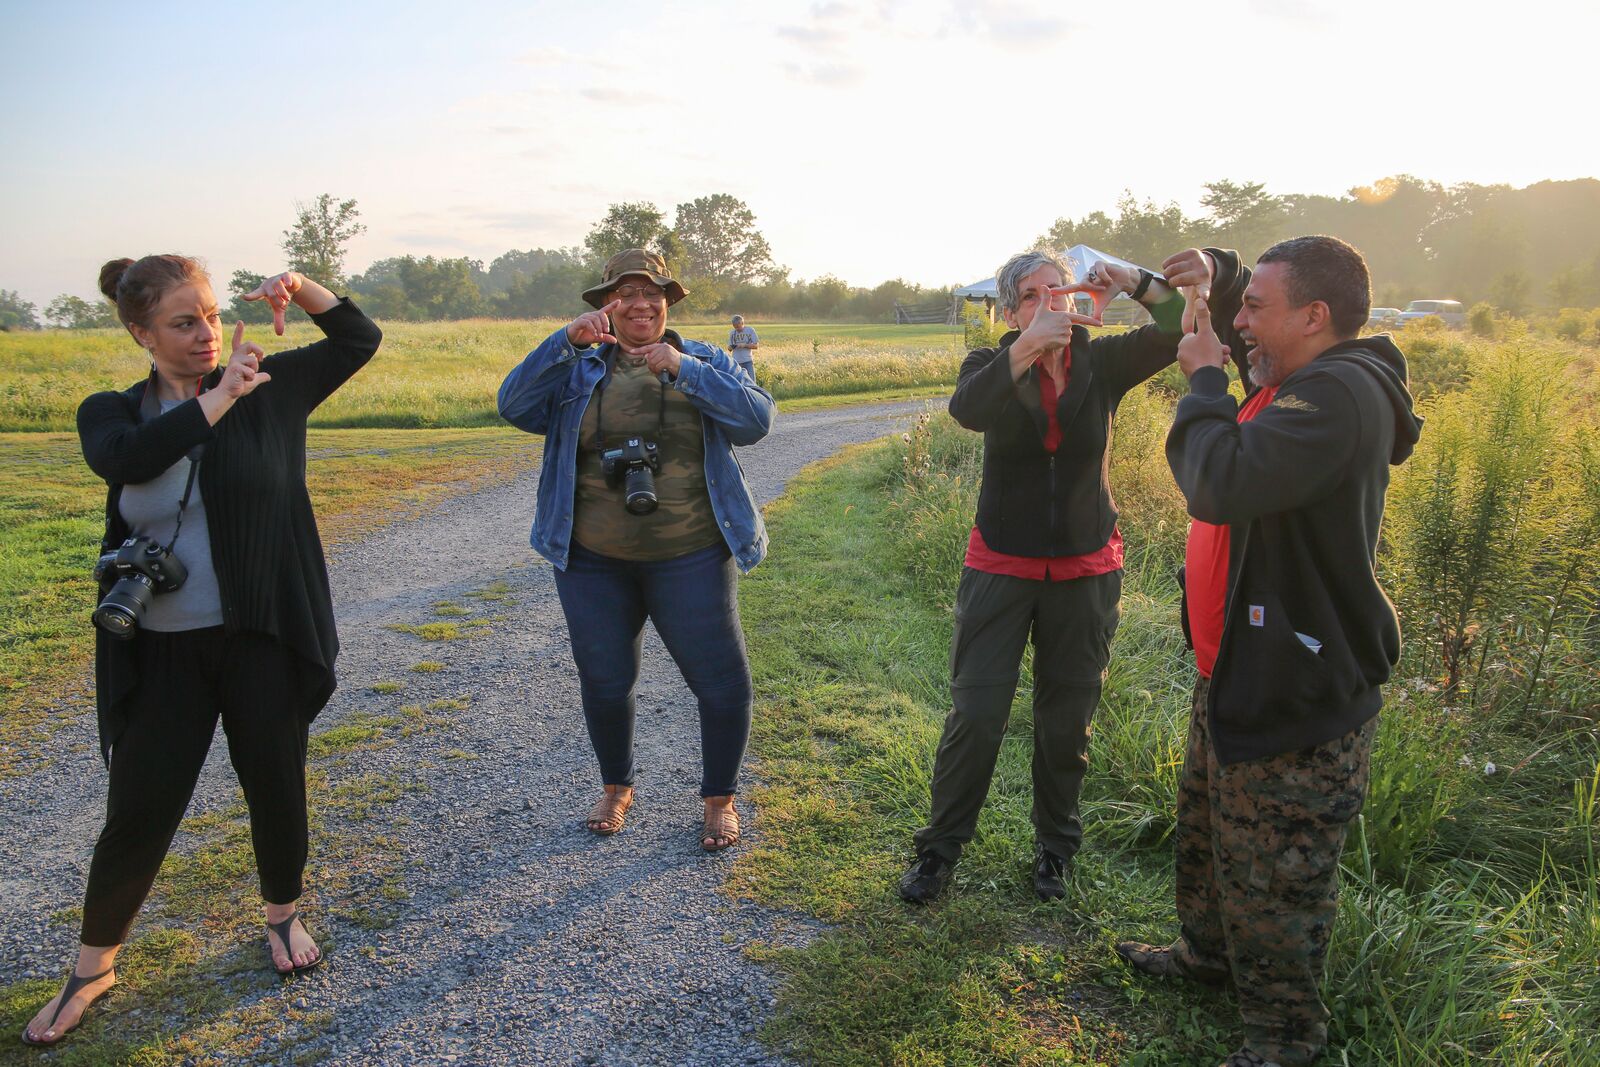 Four people standing outdoors on a sunny day with trees in the background and a path through grass. Two people have cameras that are hanging from their necks. Everyone is holding up their hands and looking through a square they made with their fingers.